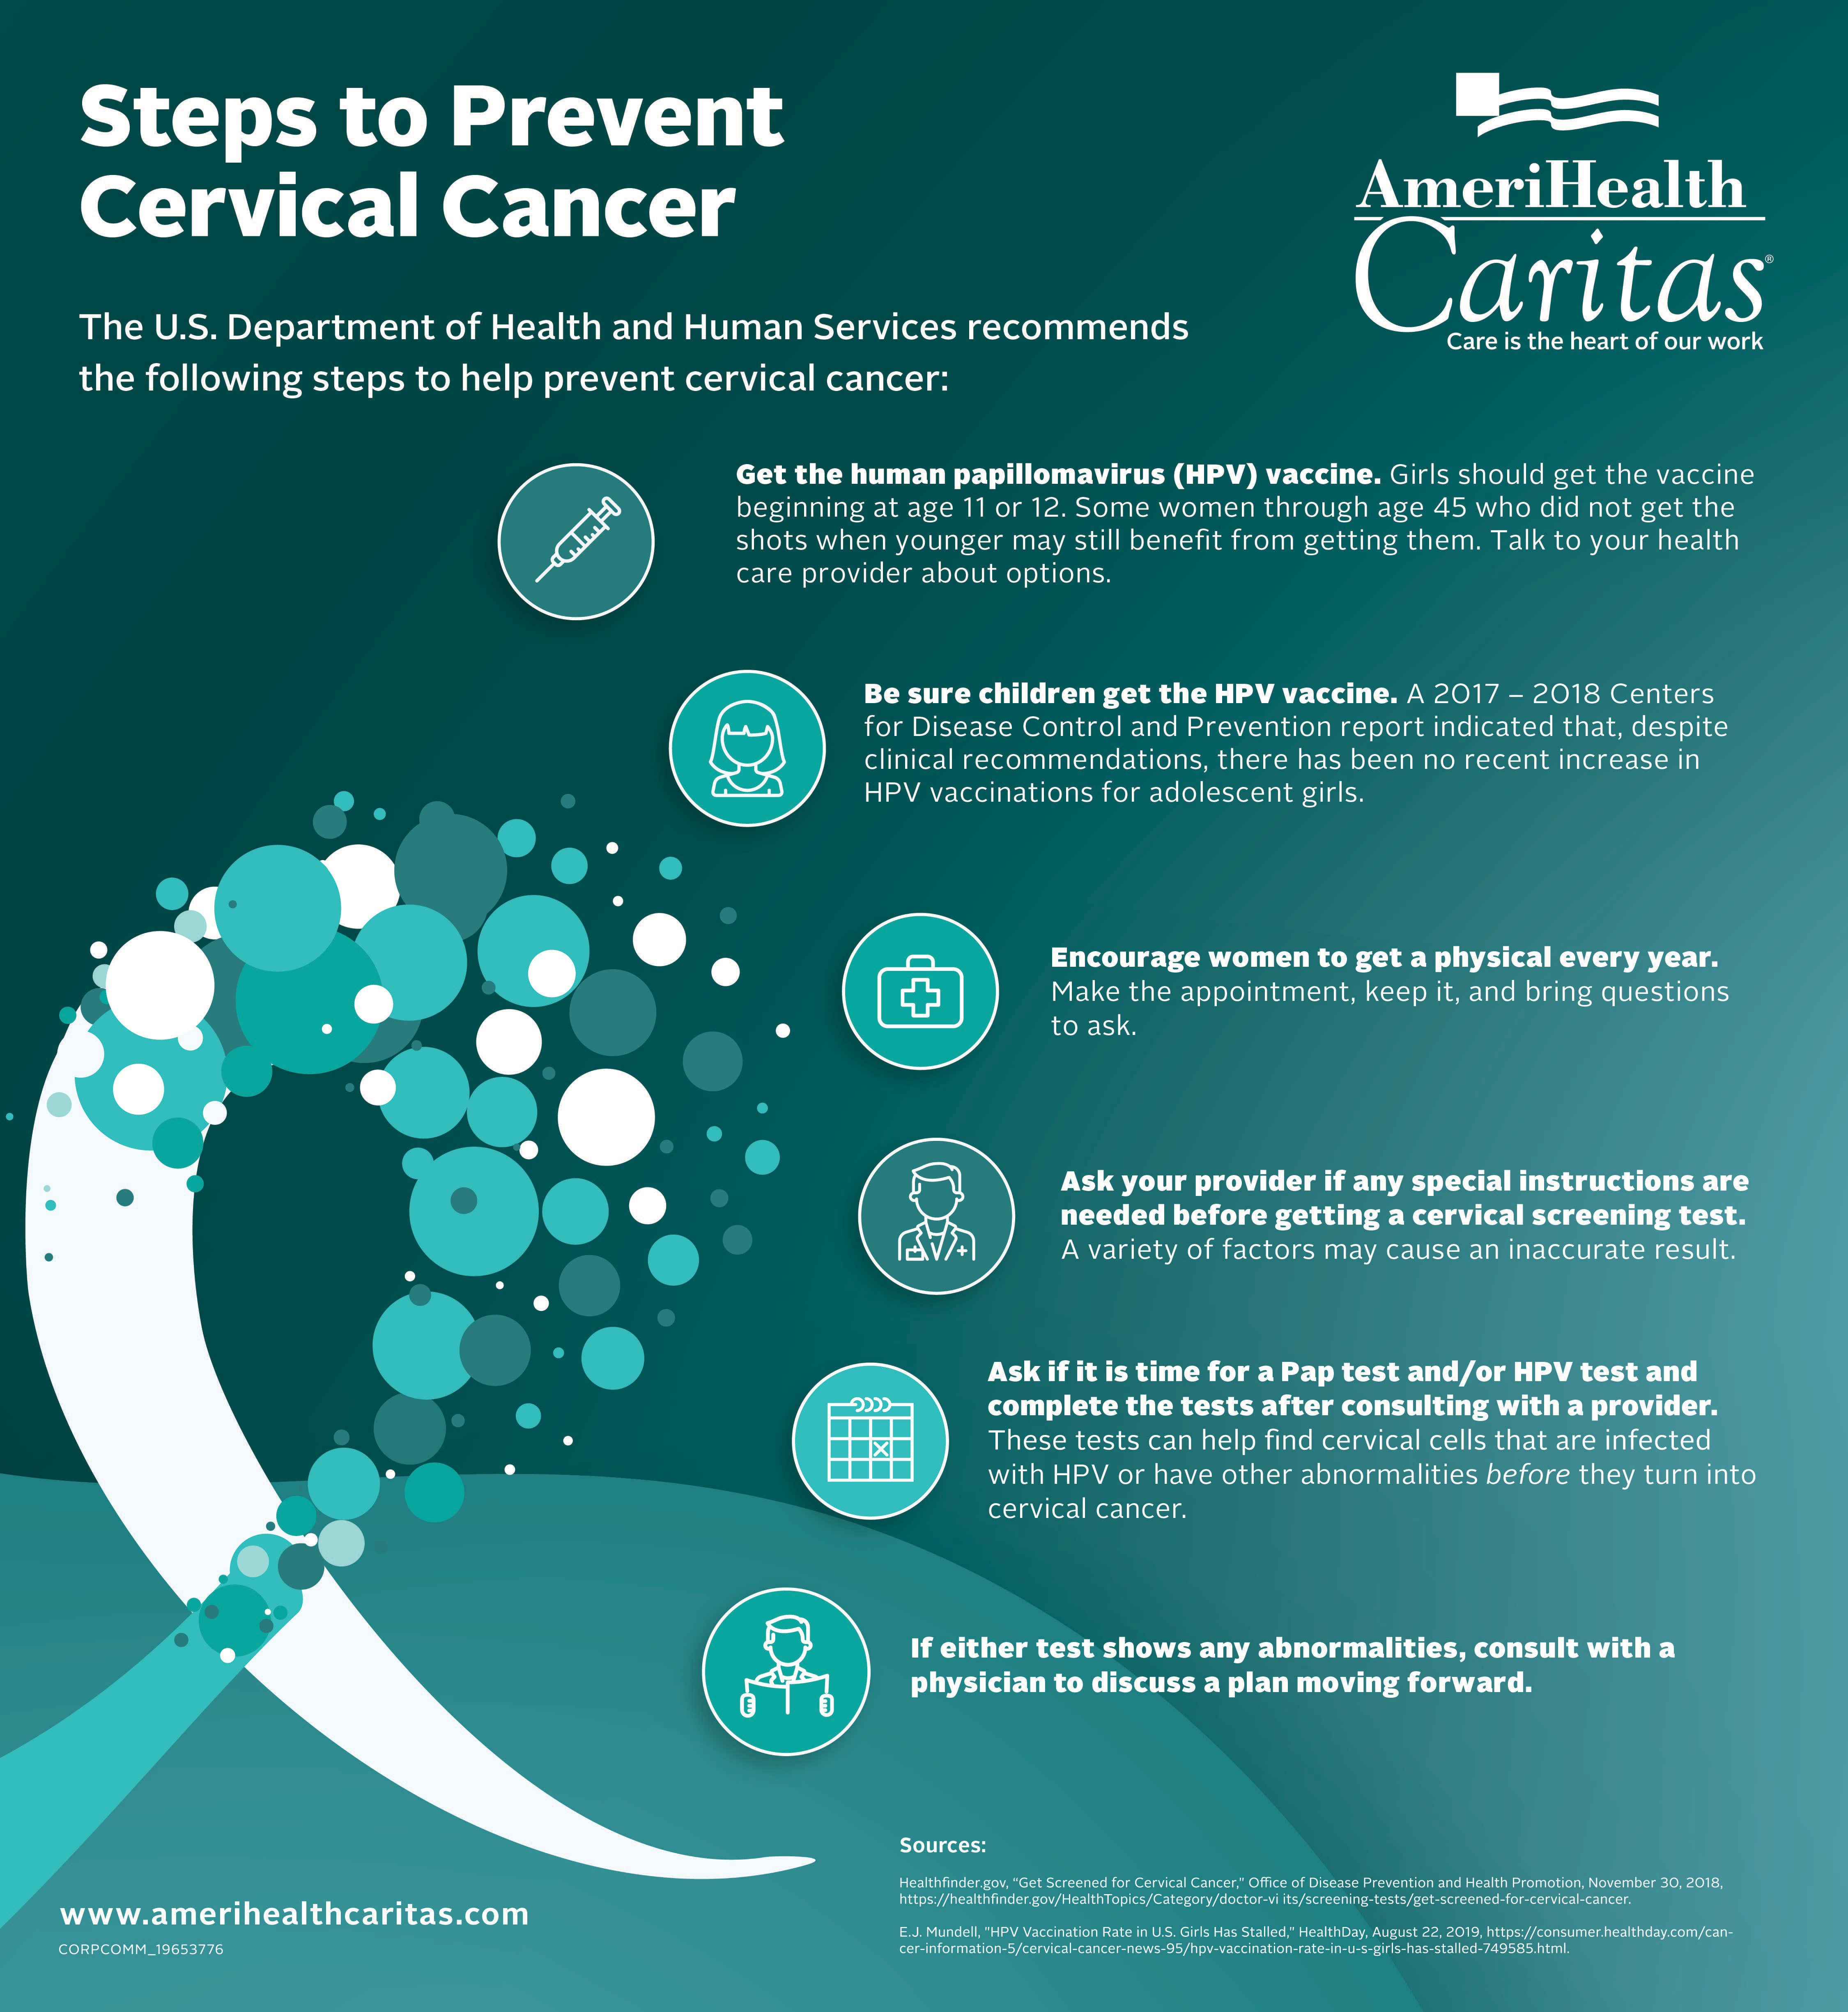 Six Tips To Help Your Patients Prevent Cervical Cancer 9410